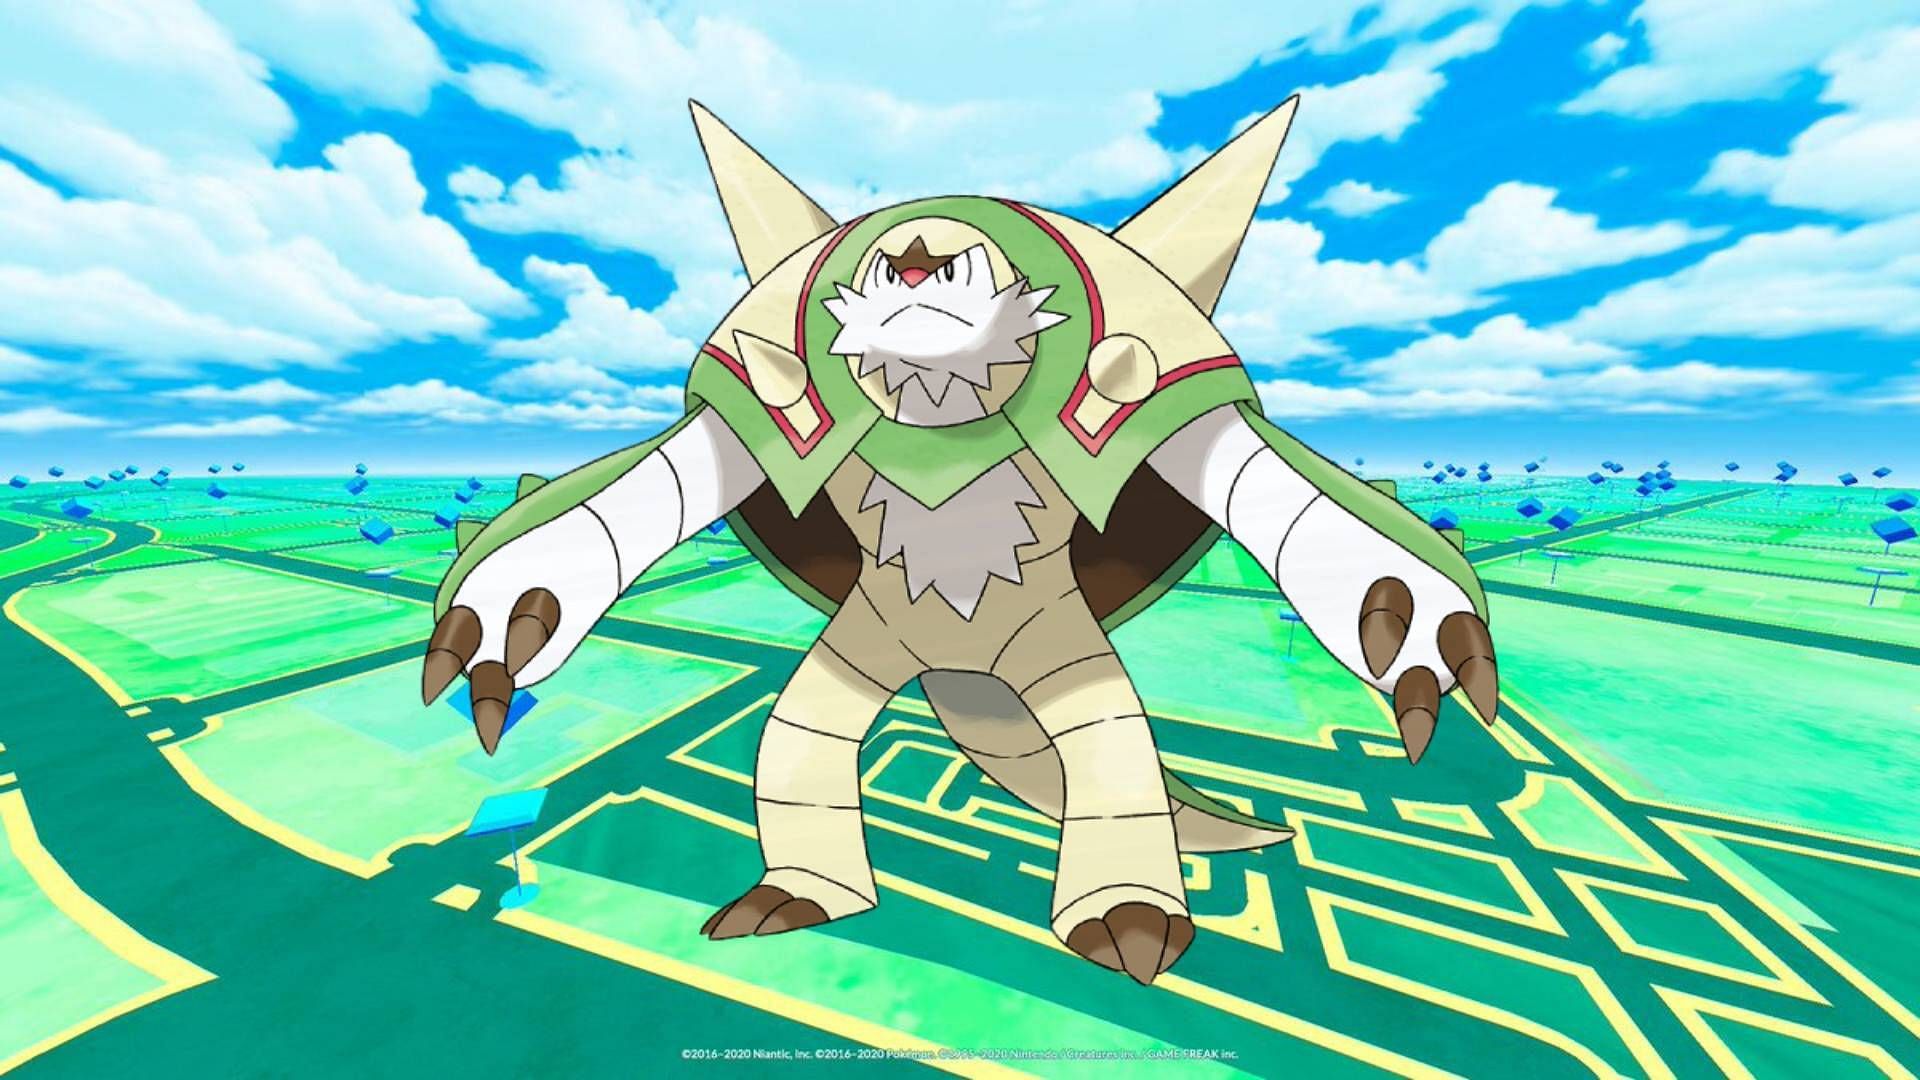 Official artwork for Chesnaught used throughout the franchise (Image via The Pokemon Company)